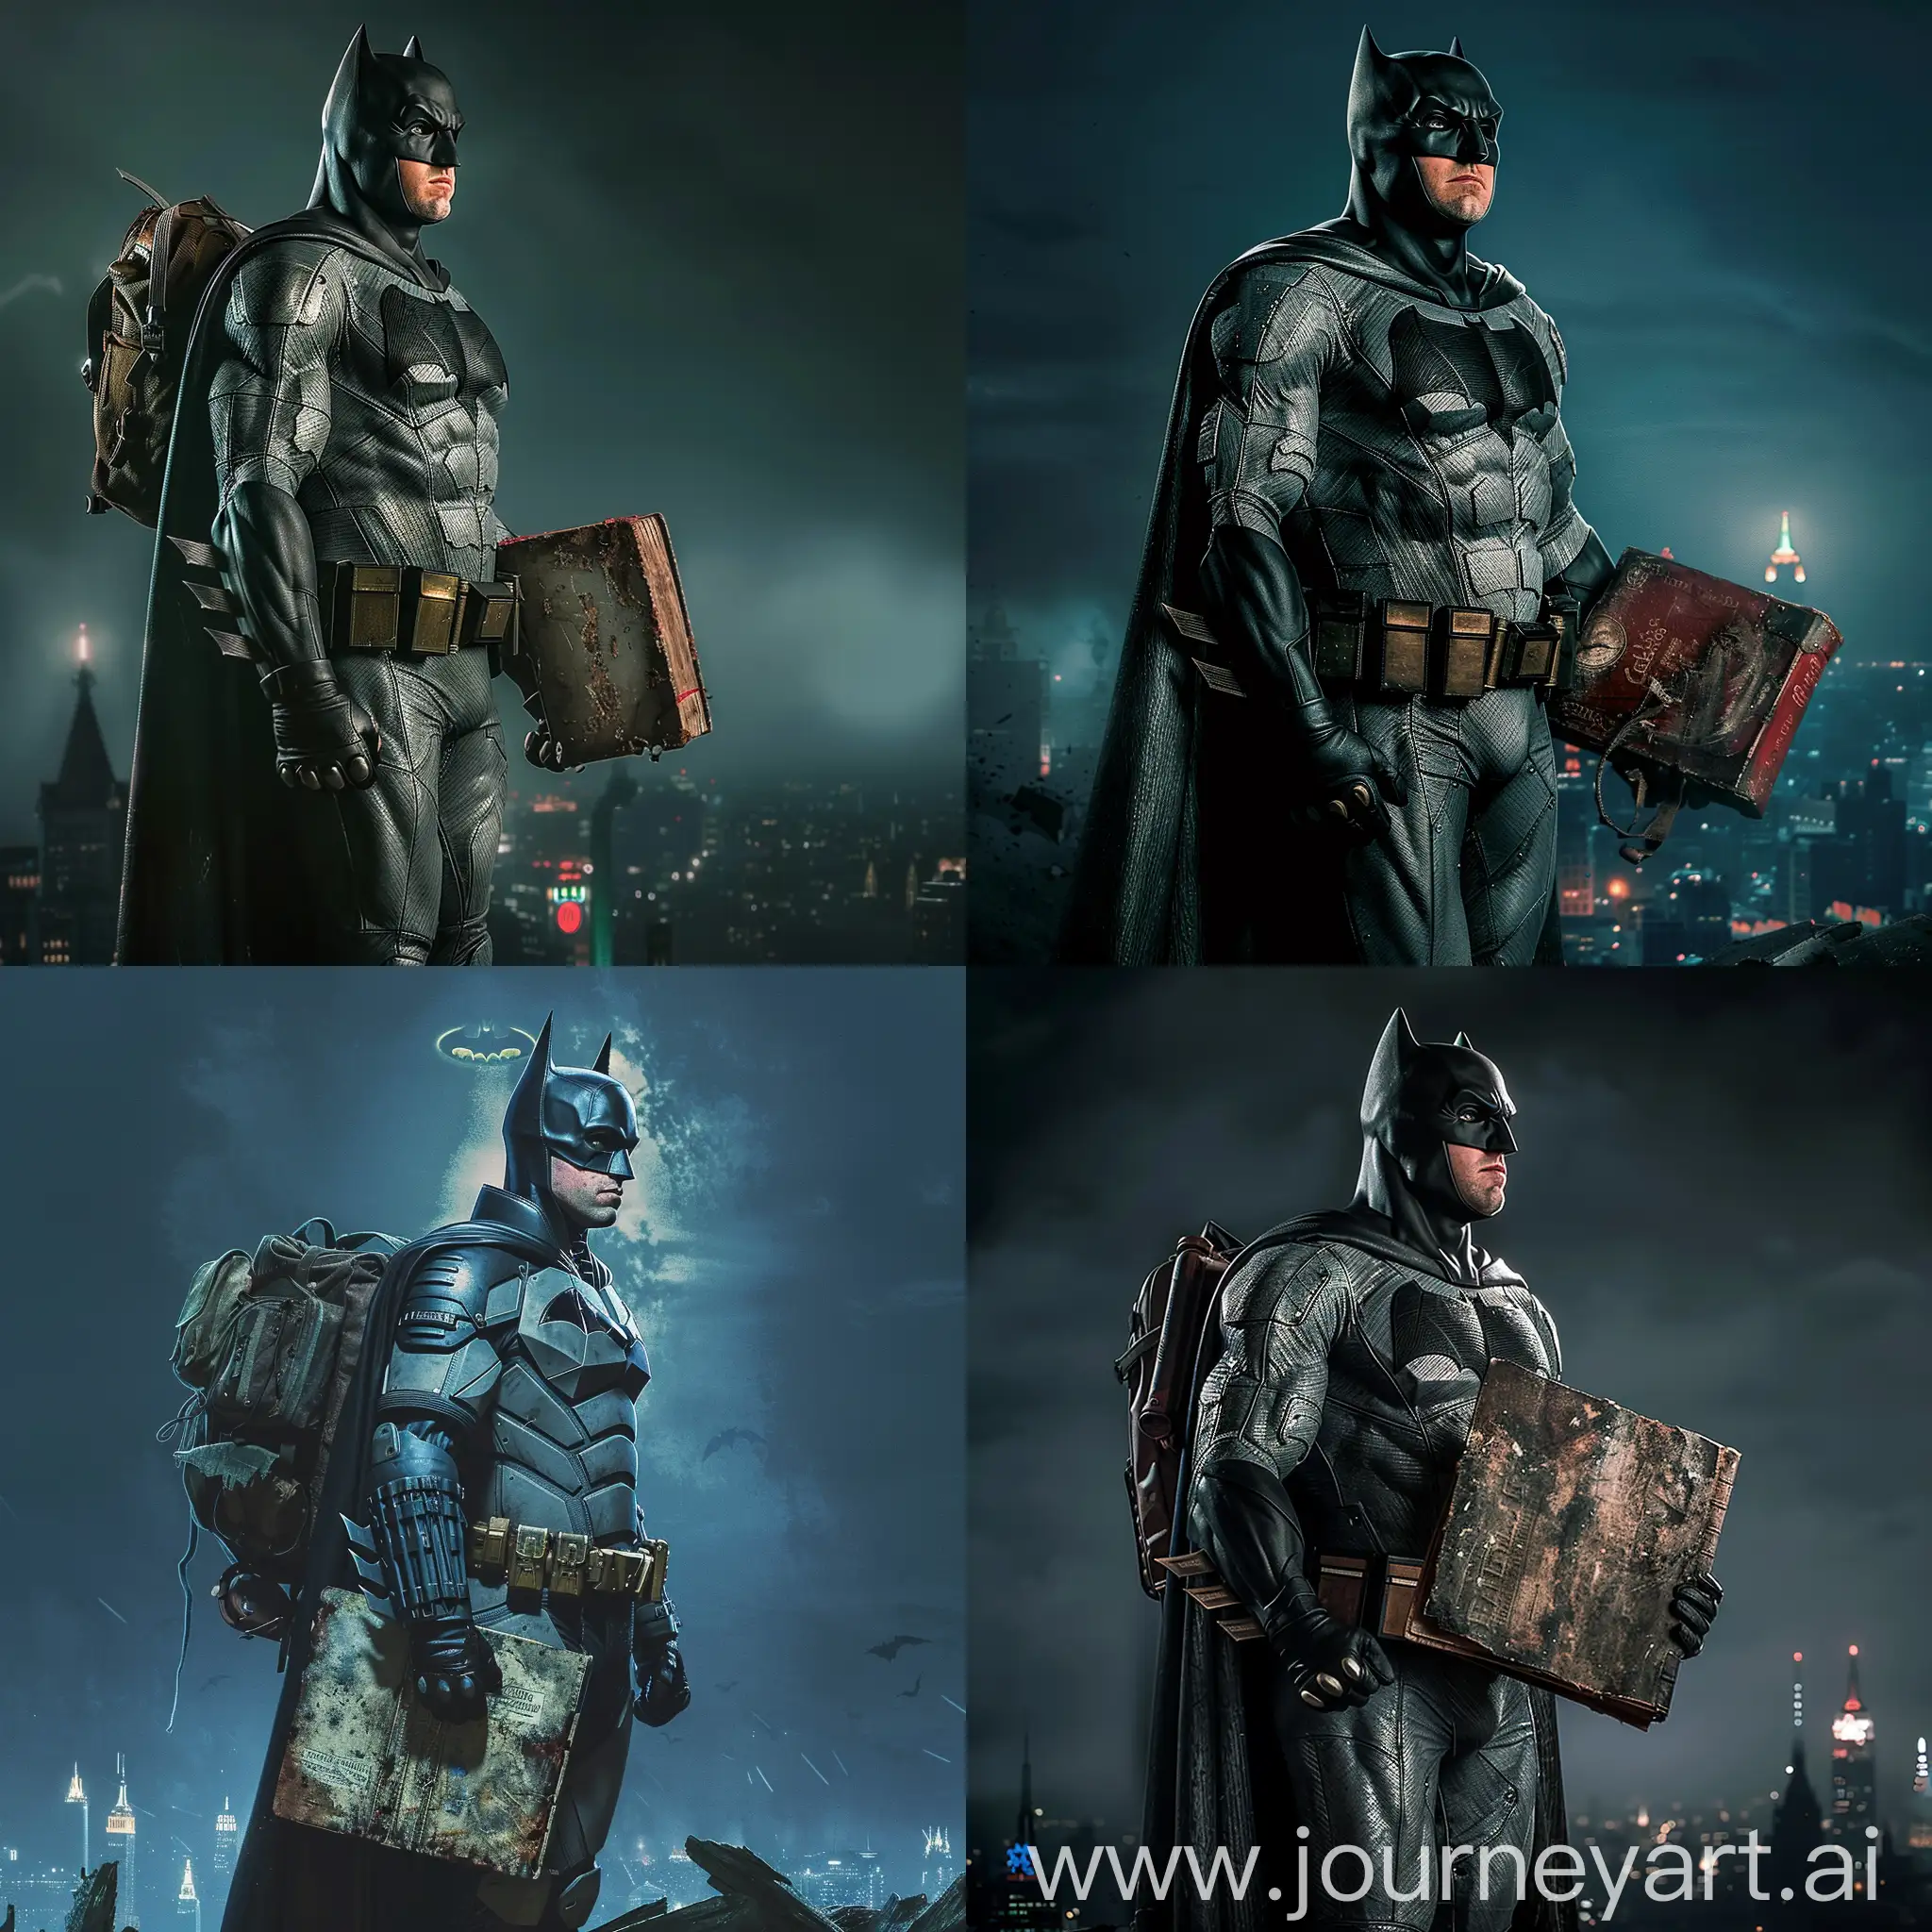 Batman-Stands-Vigilant-in-Gotham-City-at-Night-with-Backpack-and-Book